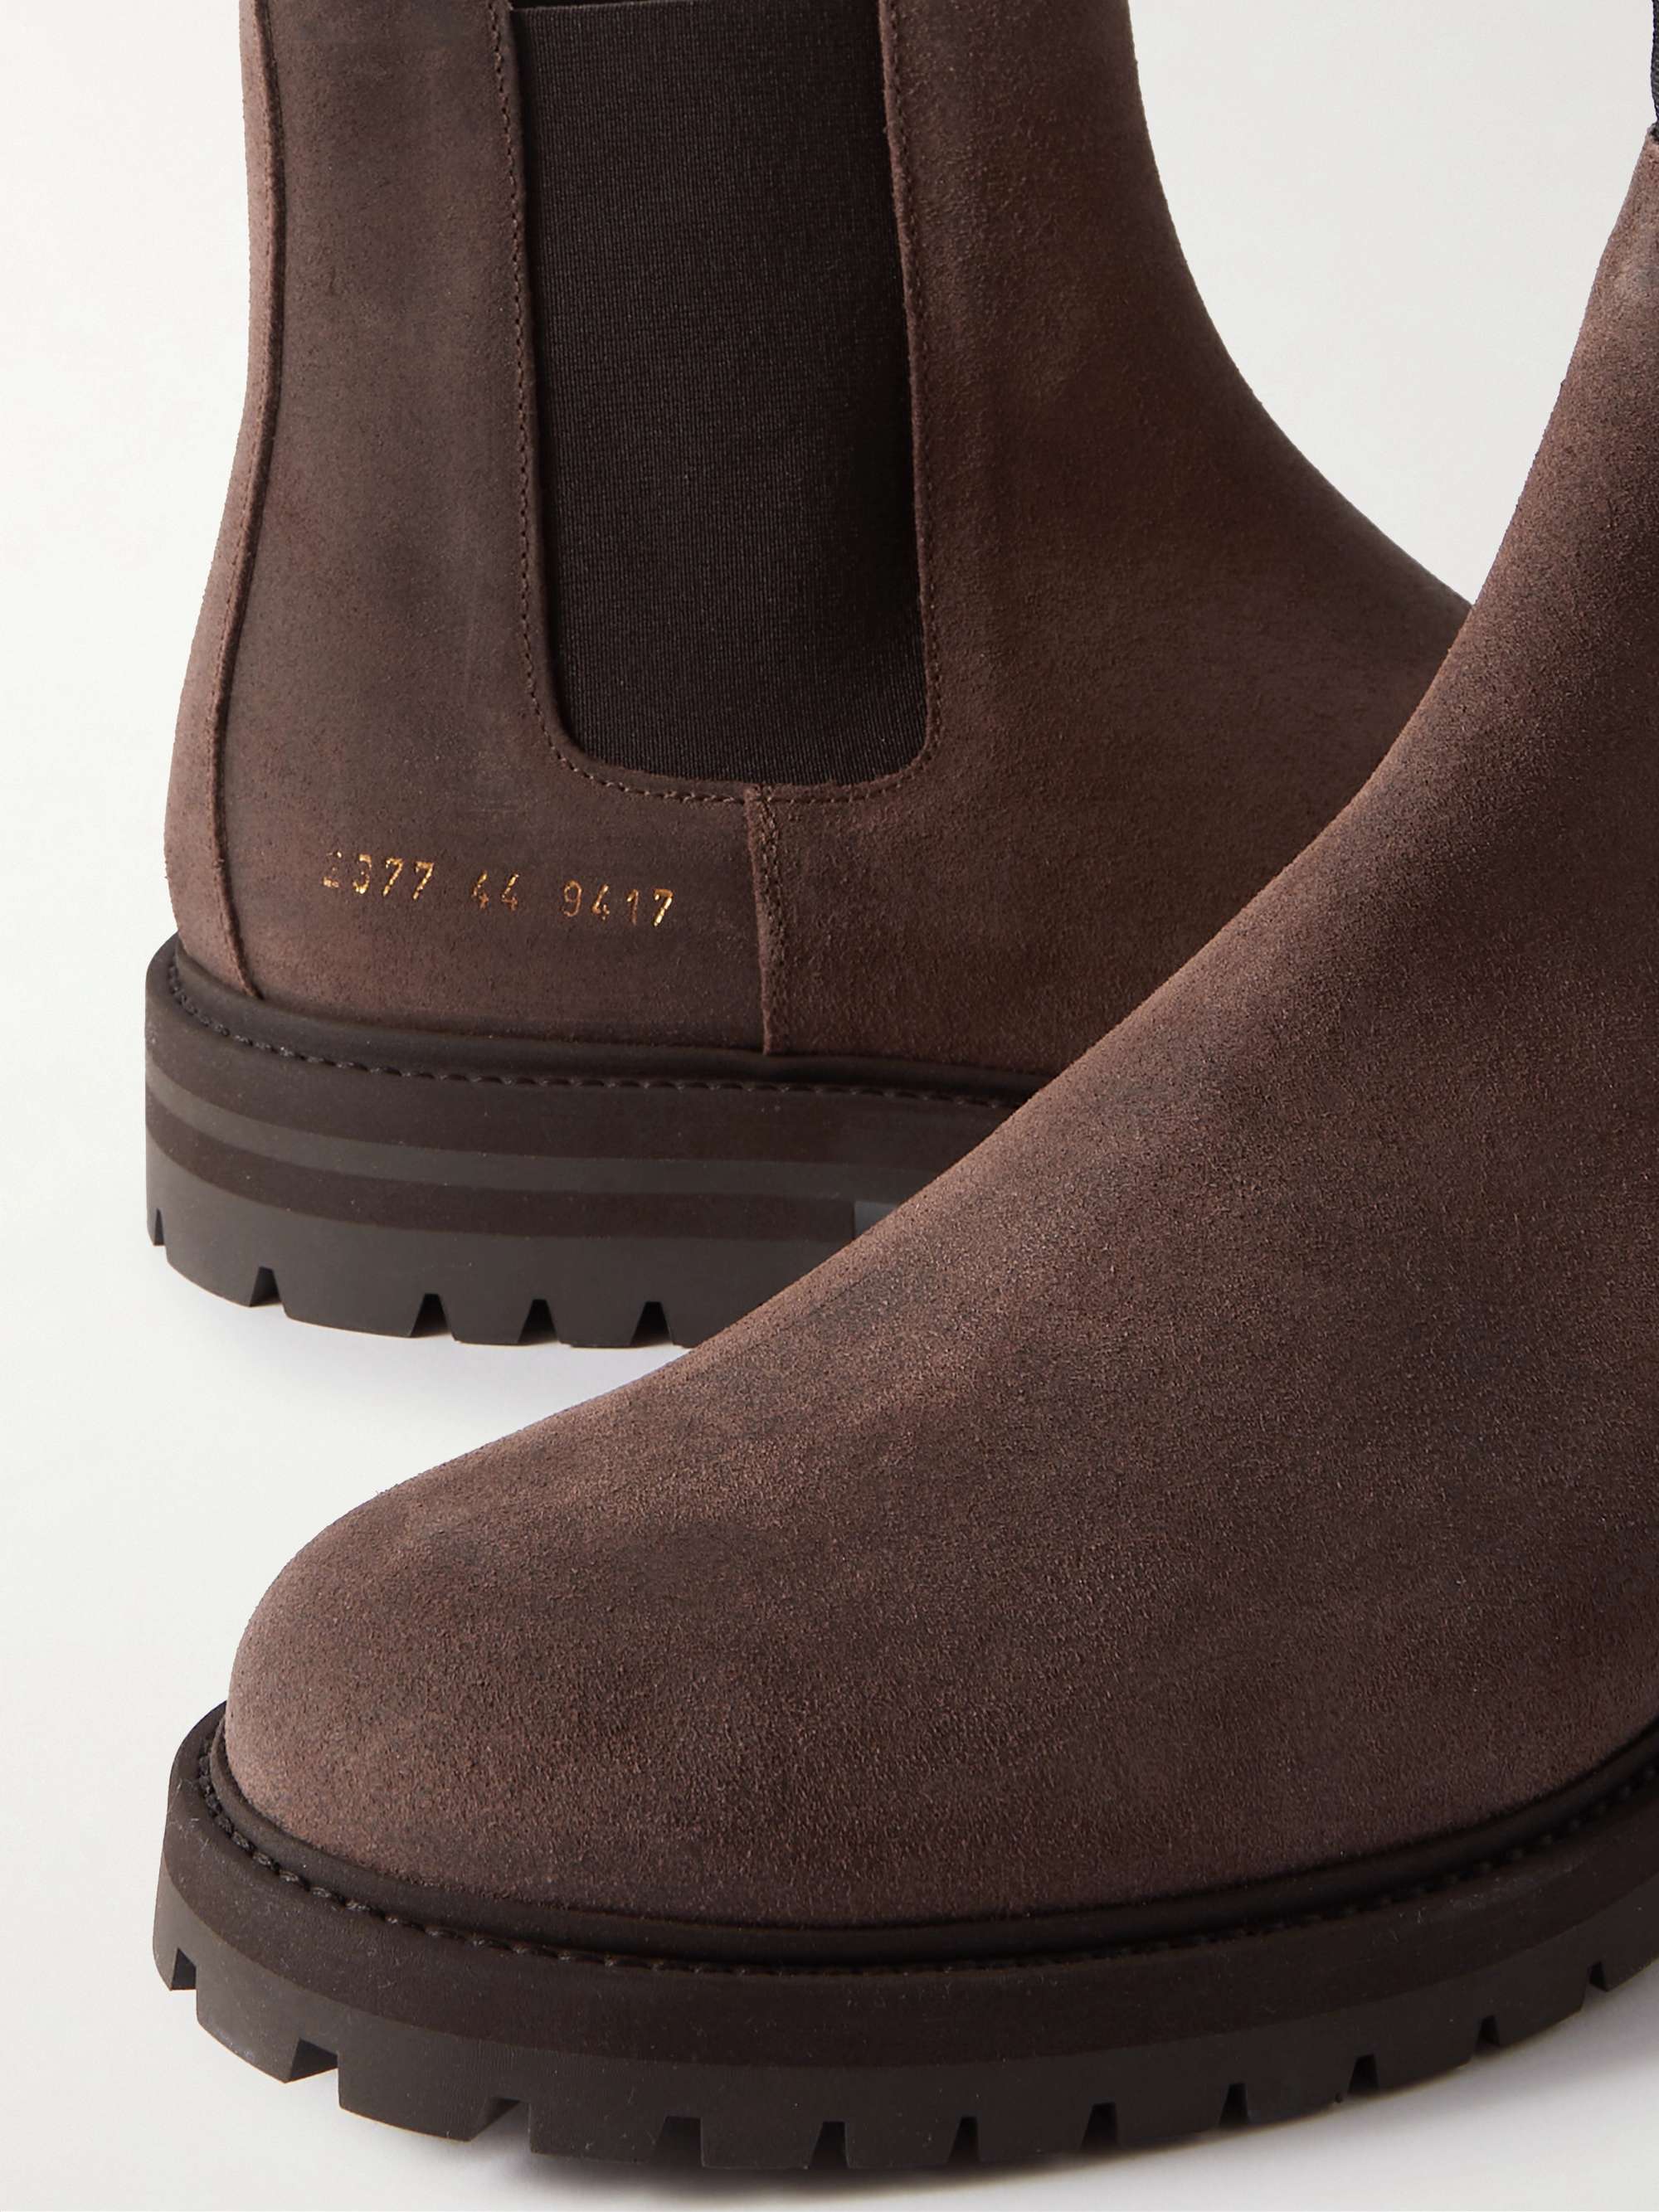 COMMON PROJECTS Suede Chelsea Boots